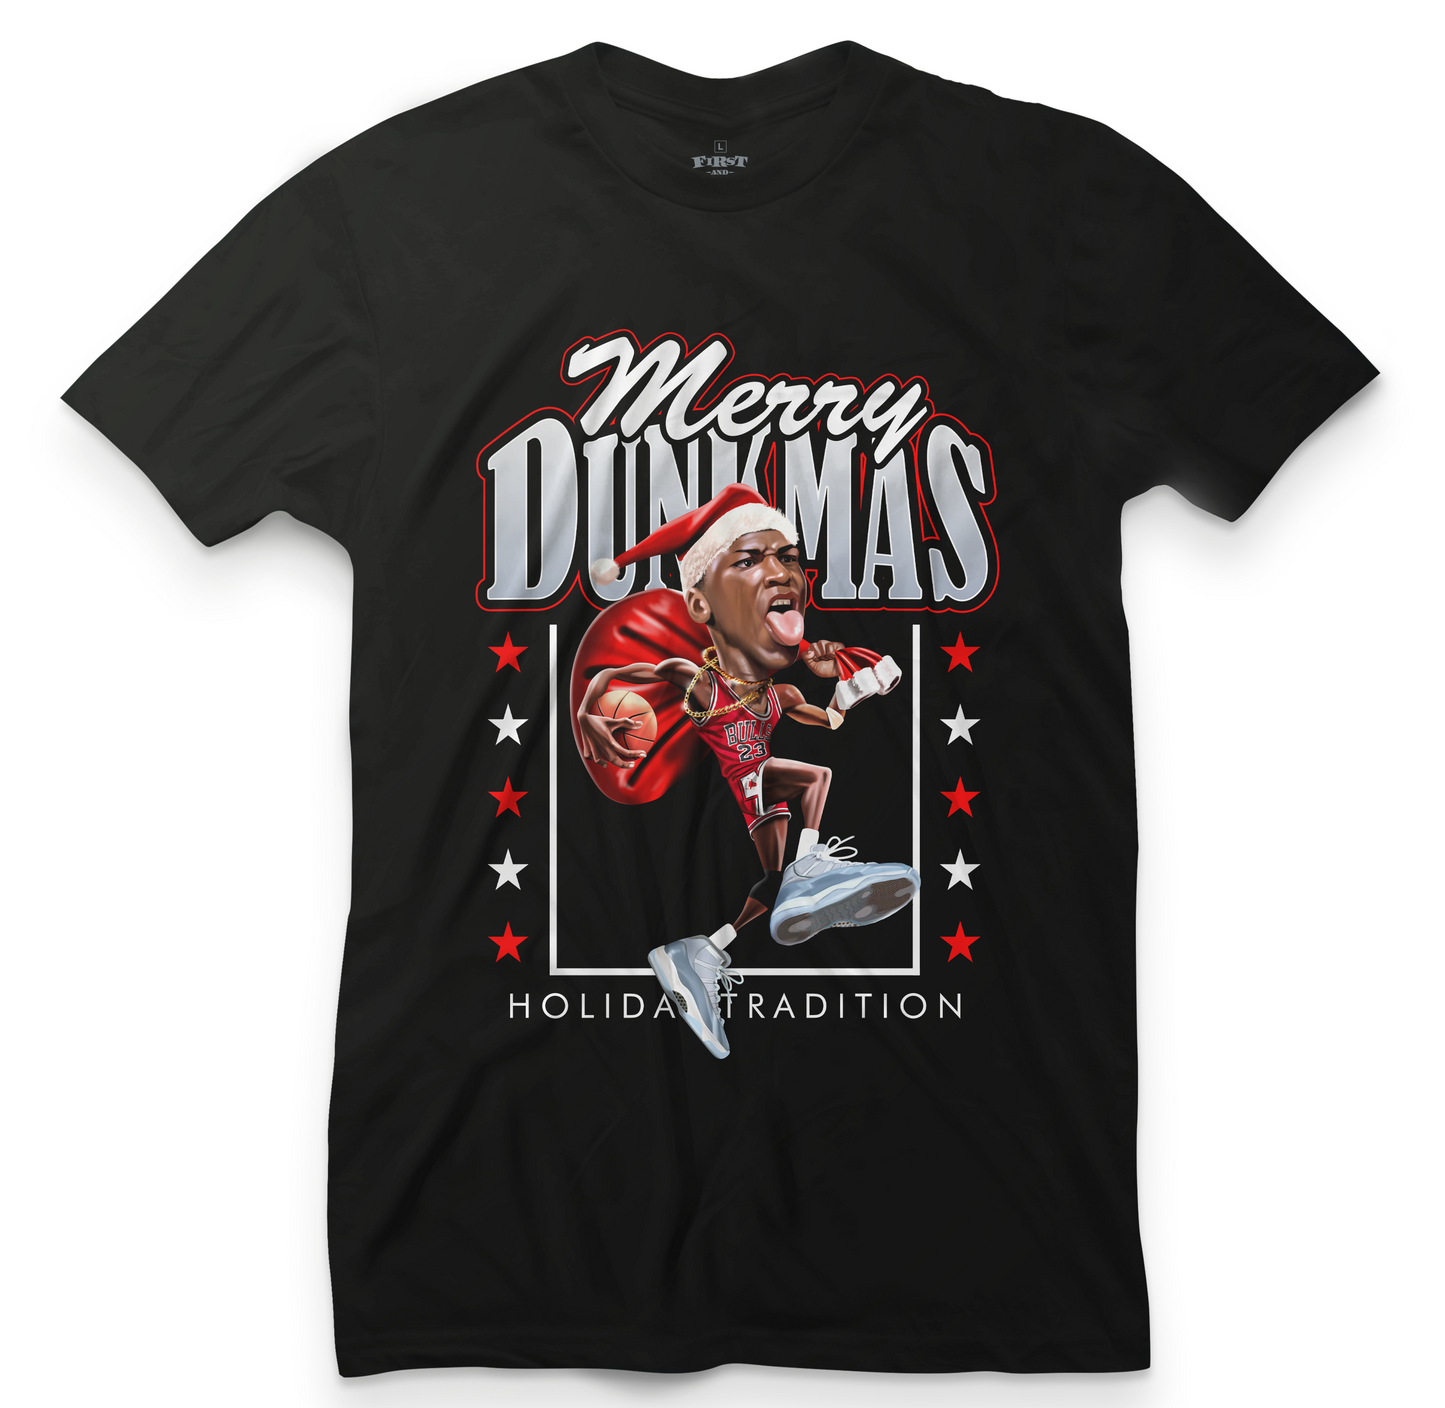 MJ Dunkmas Holiday Tradition Cool Grey 11's Tee